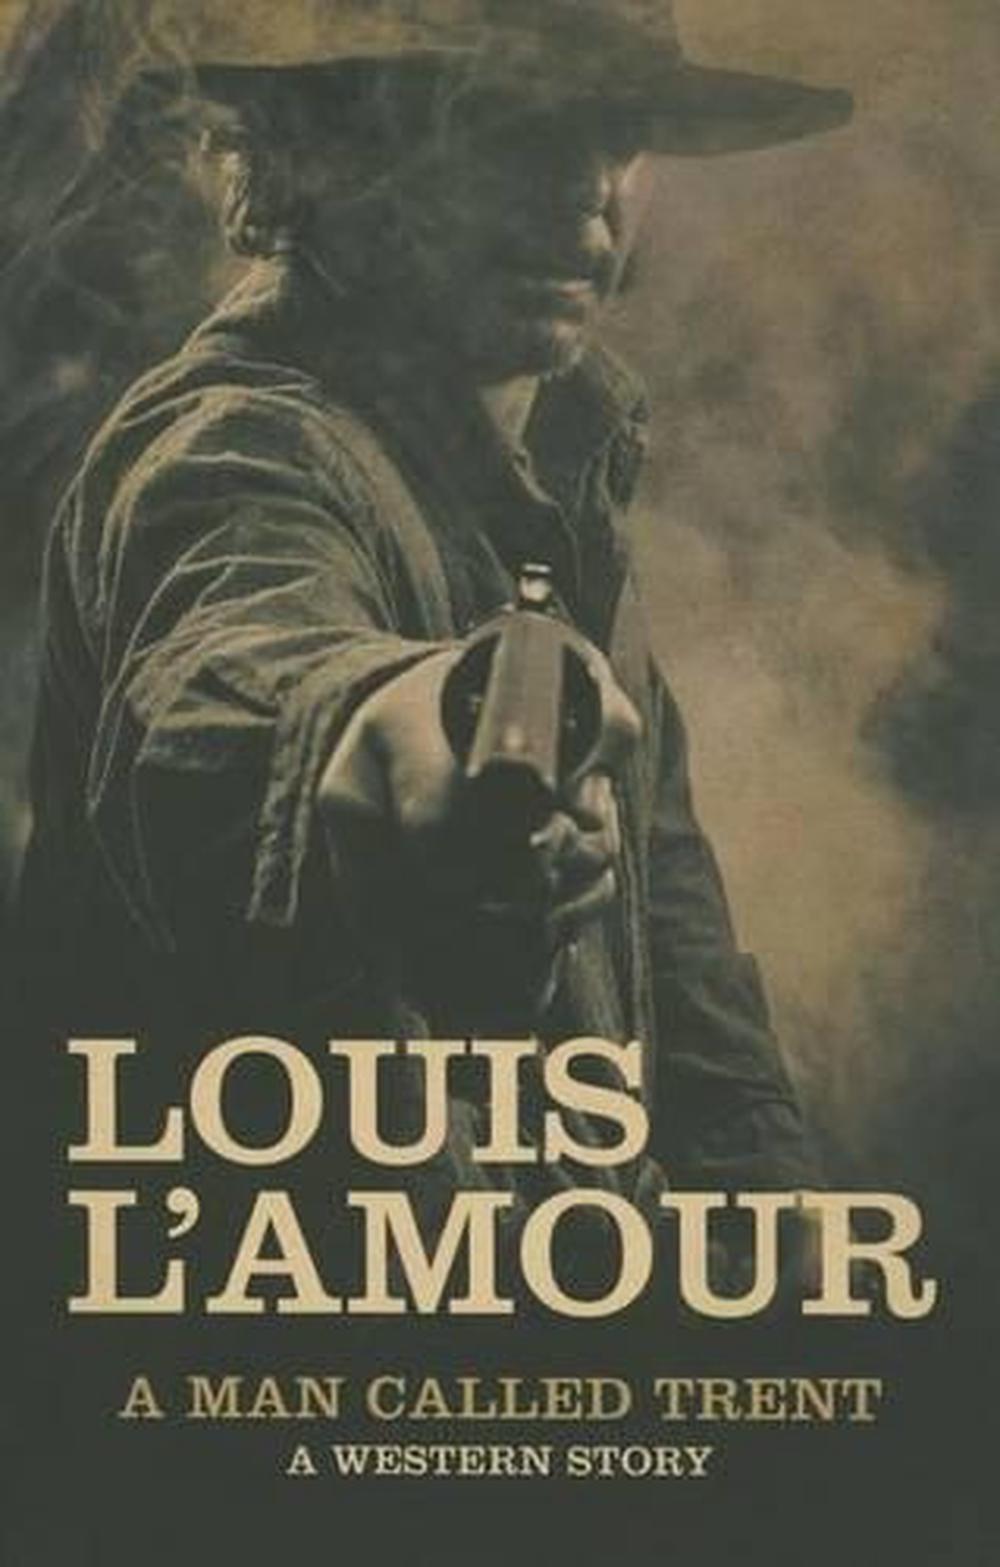 A Man Called Trent: A Western Story by Louis L&#39;Amour (English) Paperback Book Fr 9781504611978 ...